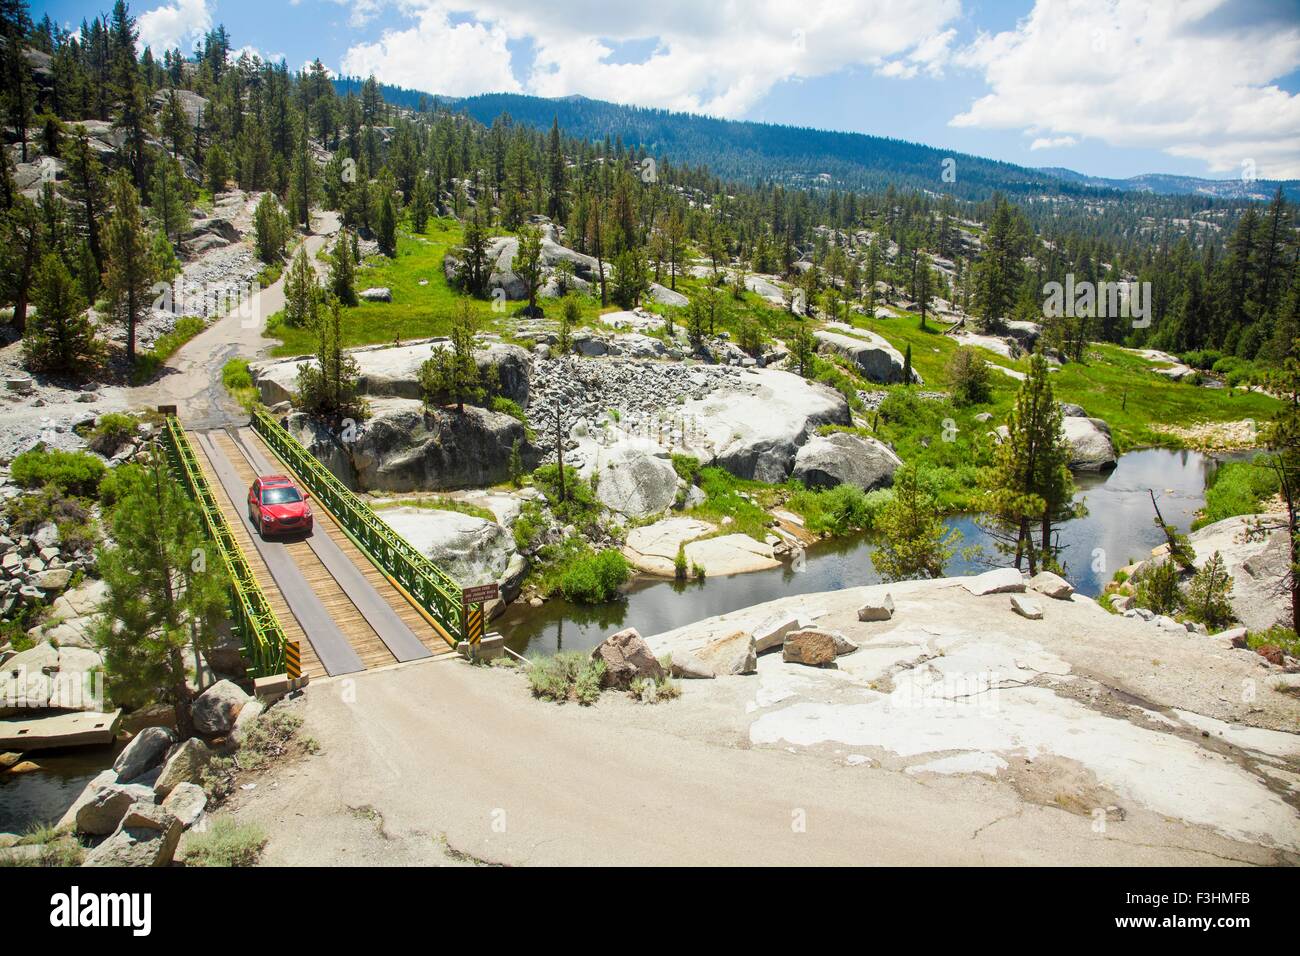 High angle view of car crossing bridge, High Sierra National Park, California, USA Banque D'Images